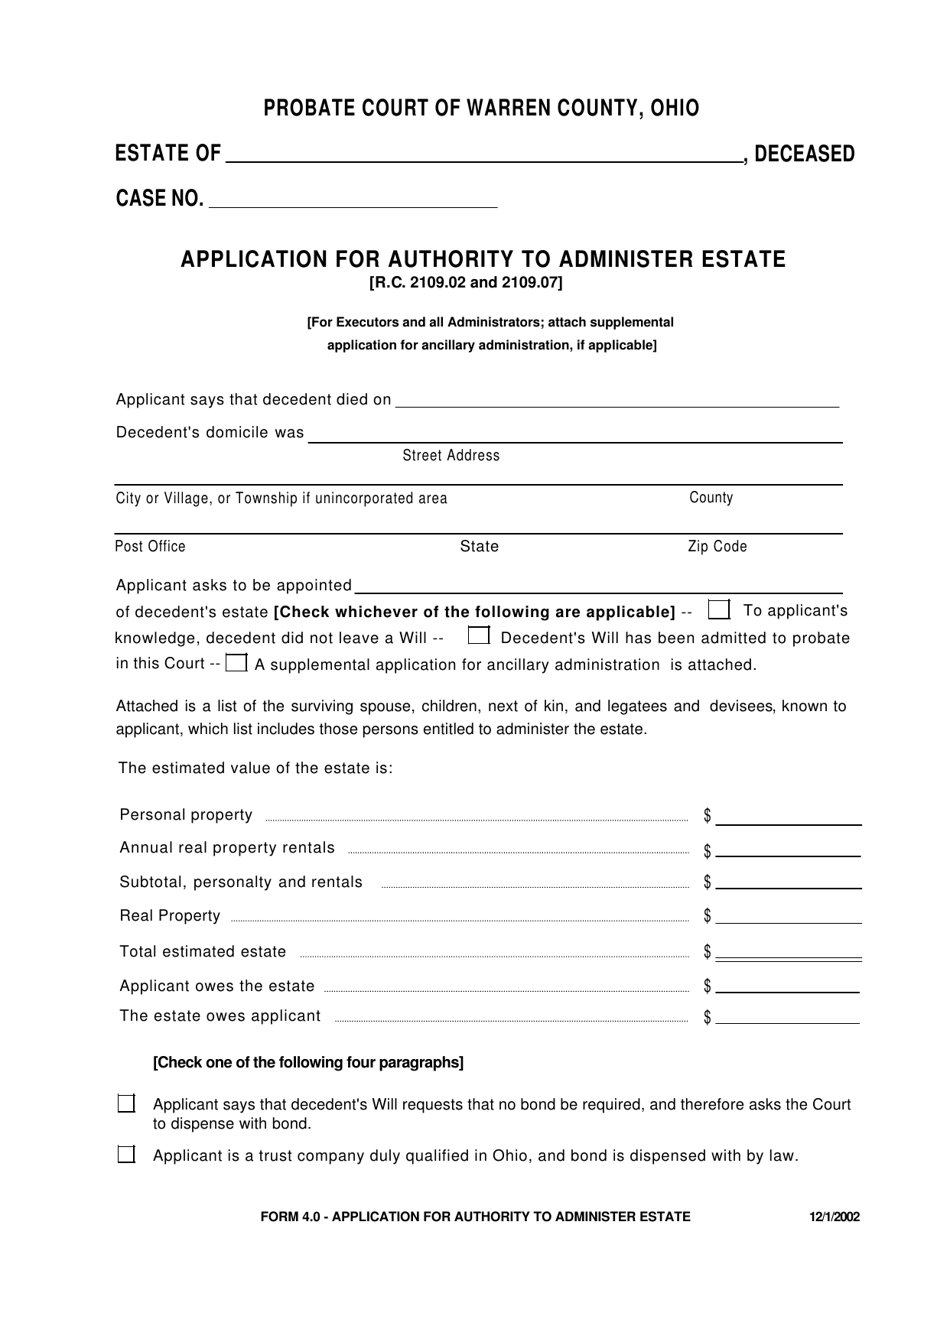 Form 4.0 Application for Authority to Administer Estate - Warren County, Ohio, Page 1